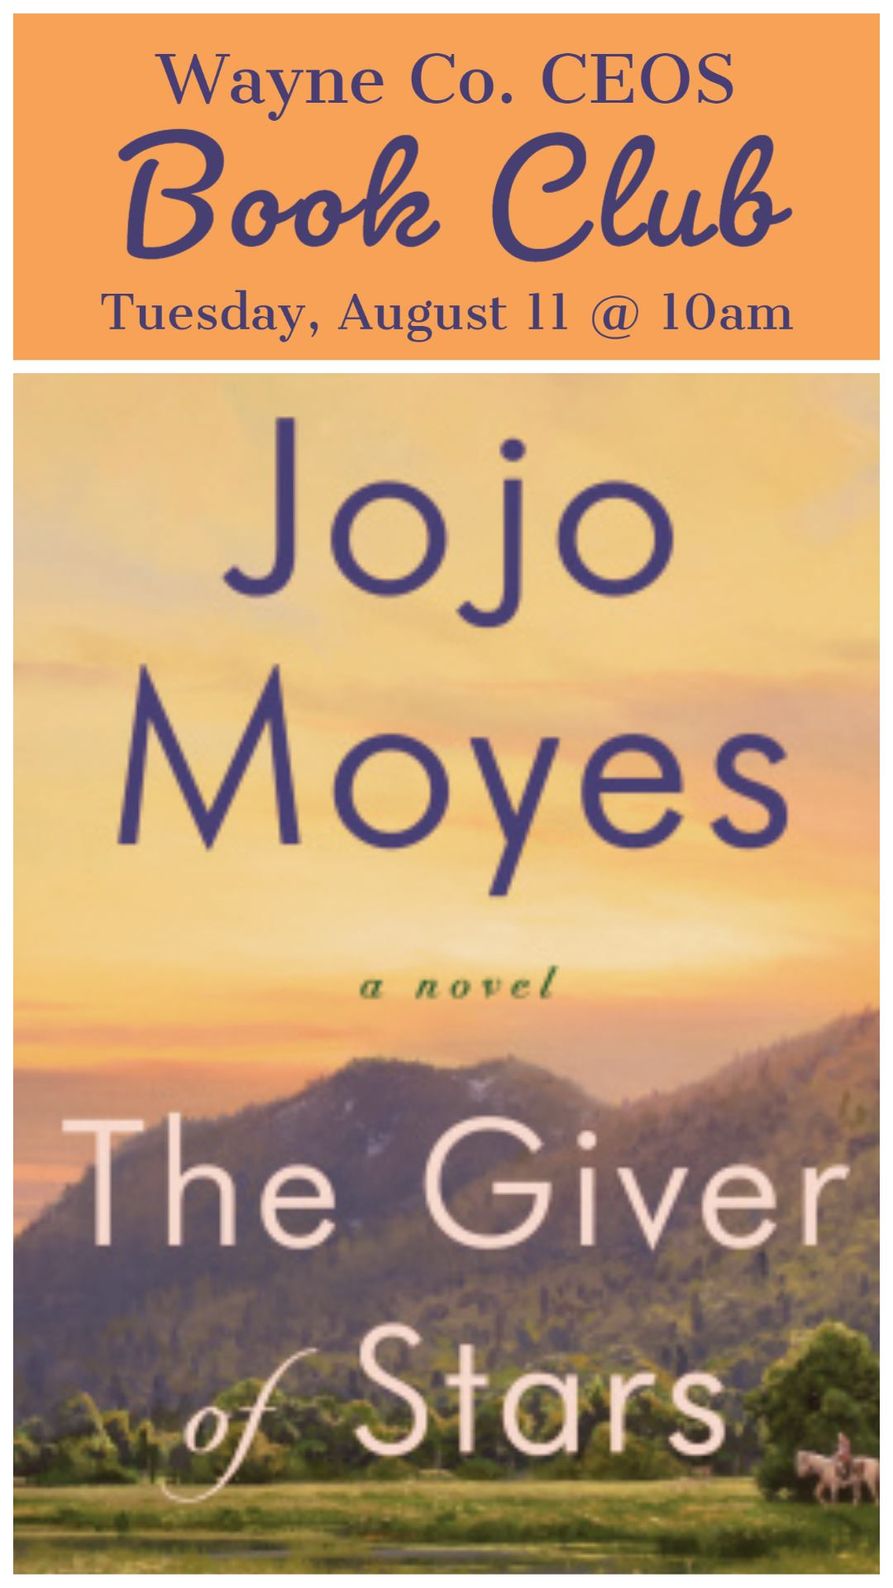 Wayne Co. CEOS Book Club Tuesday August 11 at 10am JoJo Moyes a novel The Giver of Stars